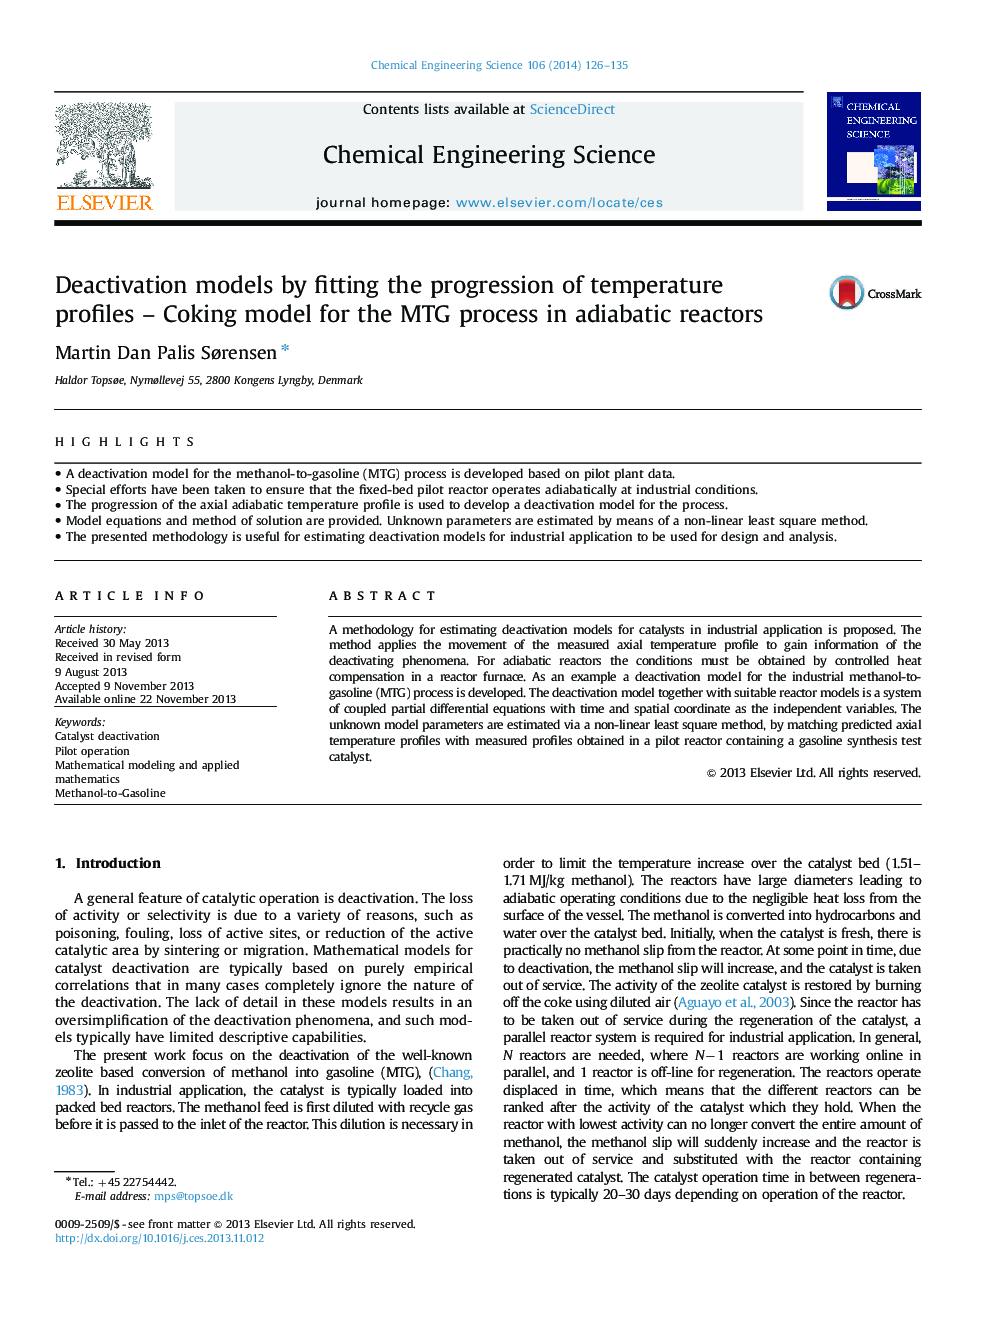 Deactivation models by fitting the progression of temperature profiles – Coking model for the MTG process in adiabatic reactors